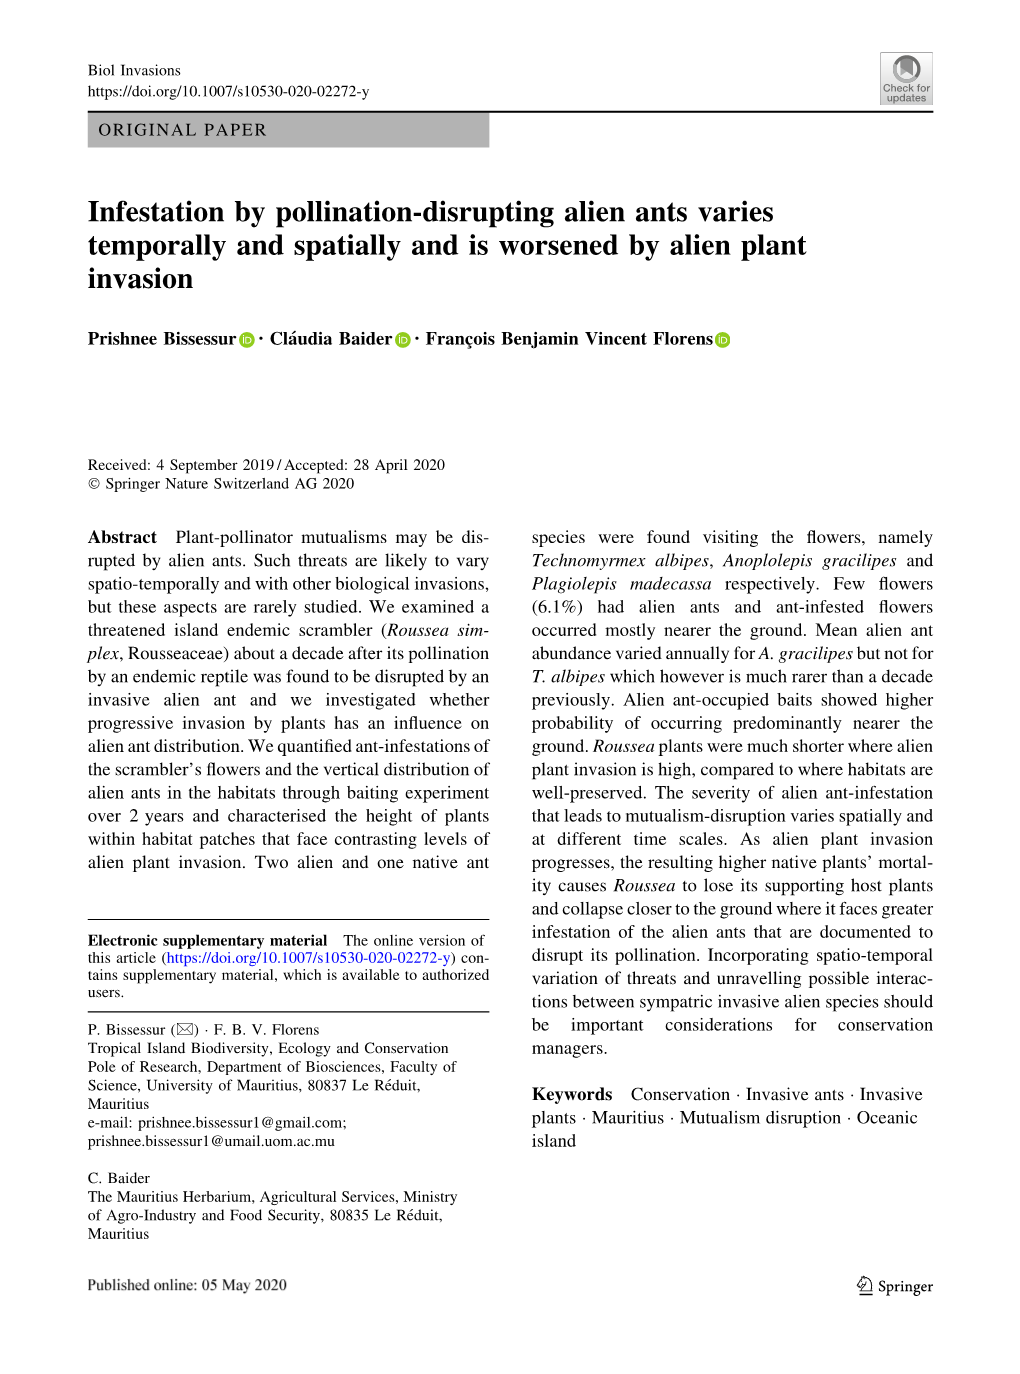 Infestation by Pollination-Disrupting Alien Ants Varies Temporally and Spatially and Is Worsened by Alien Plant Invasion